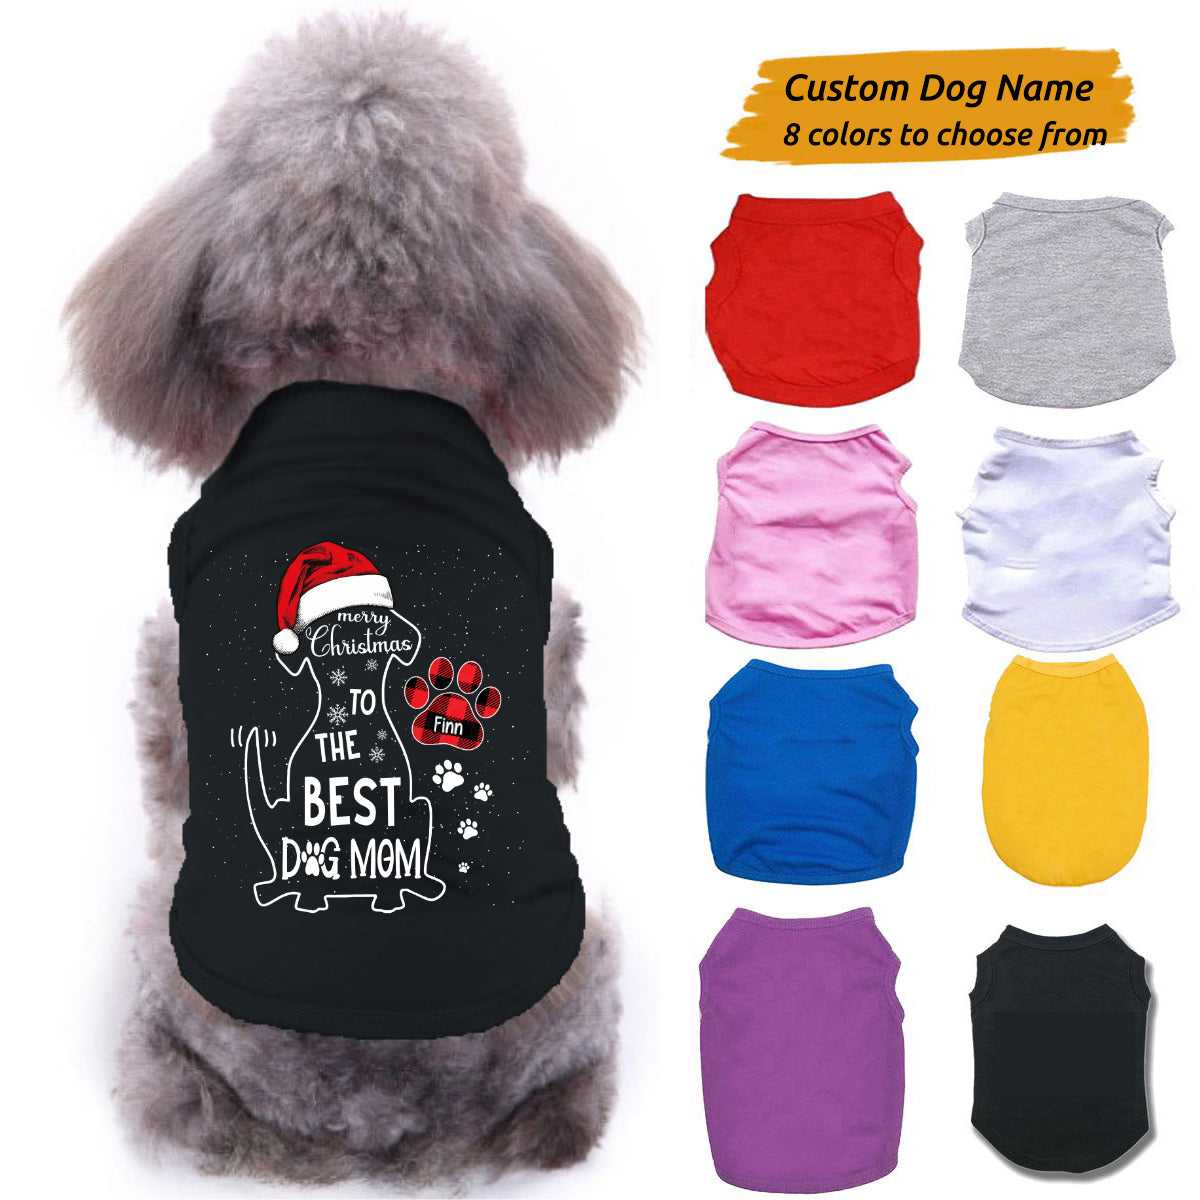 Merry Christmas To The Best Dog Mom Personalized Dog Clothes